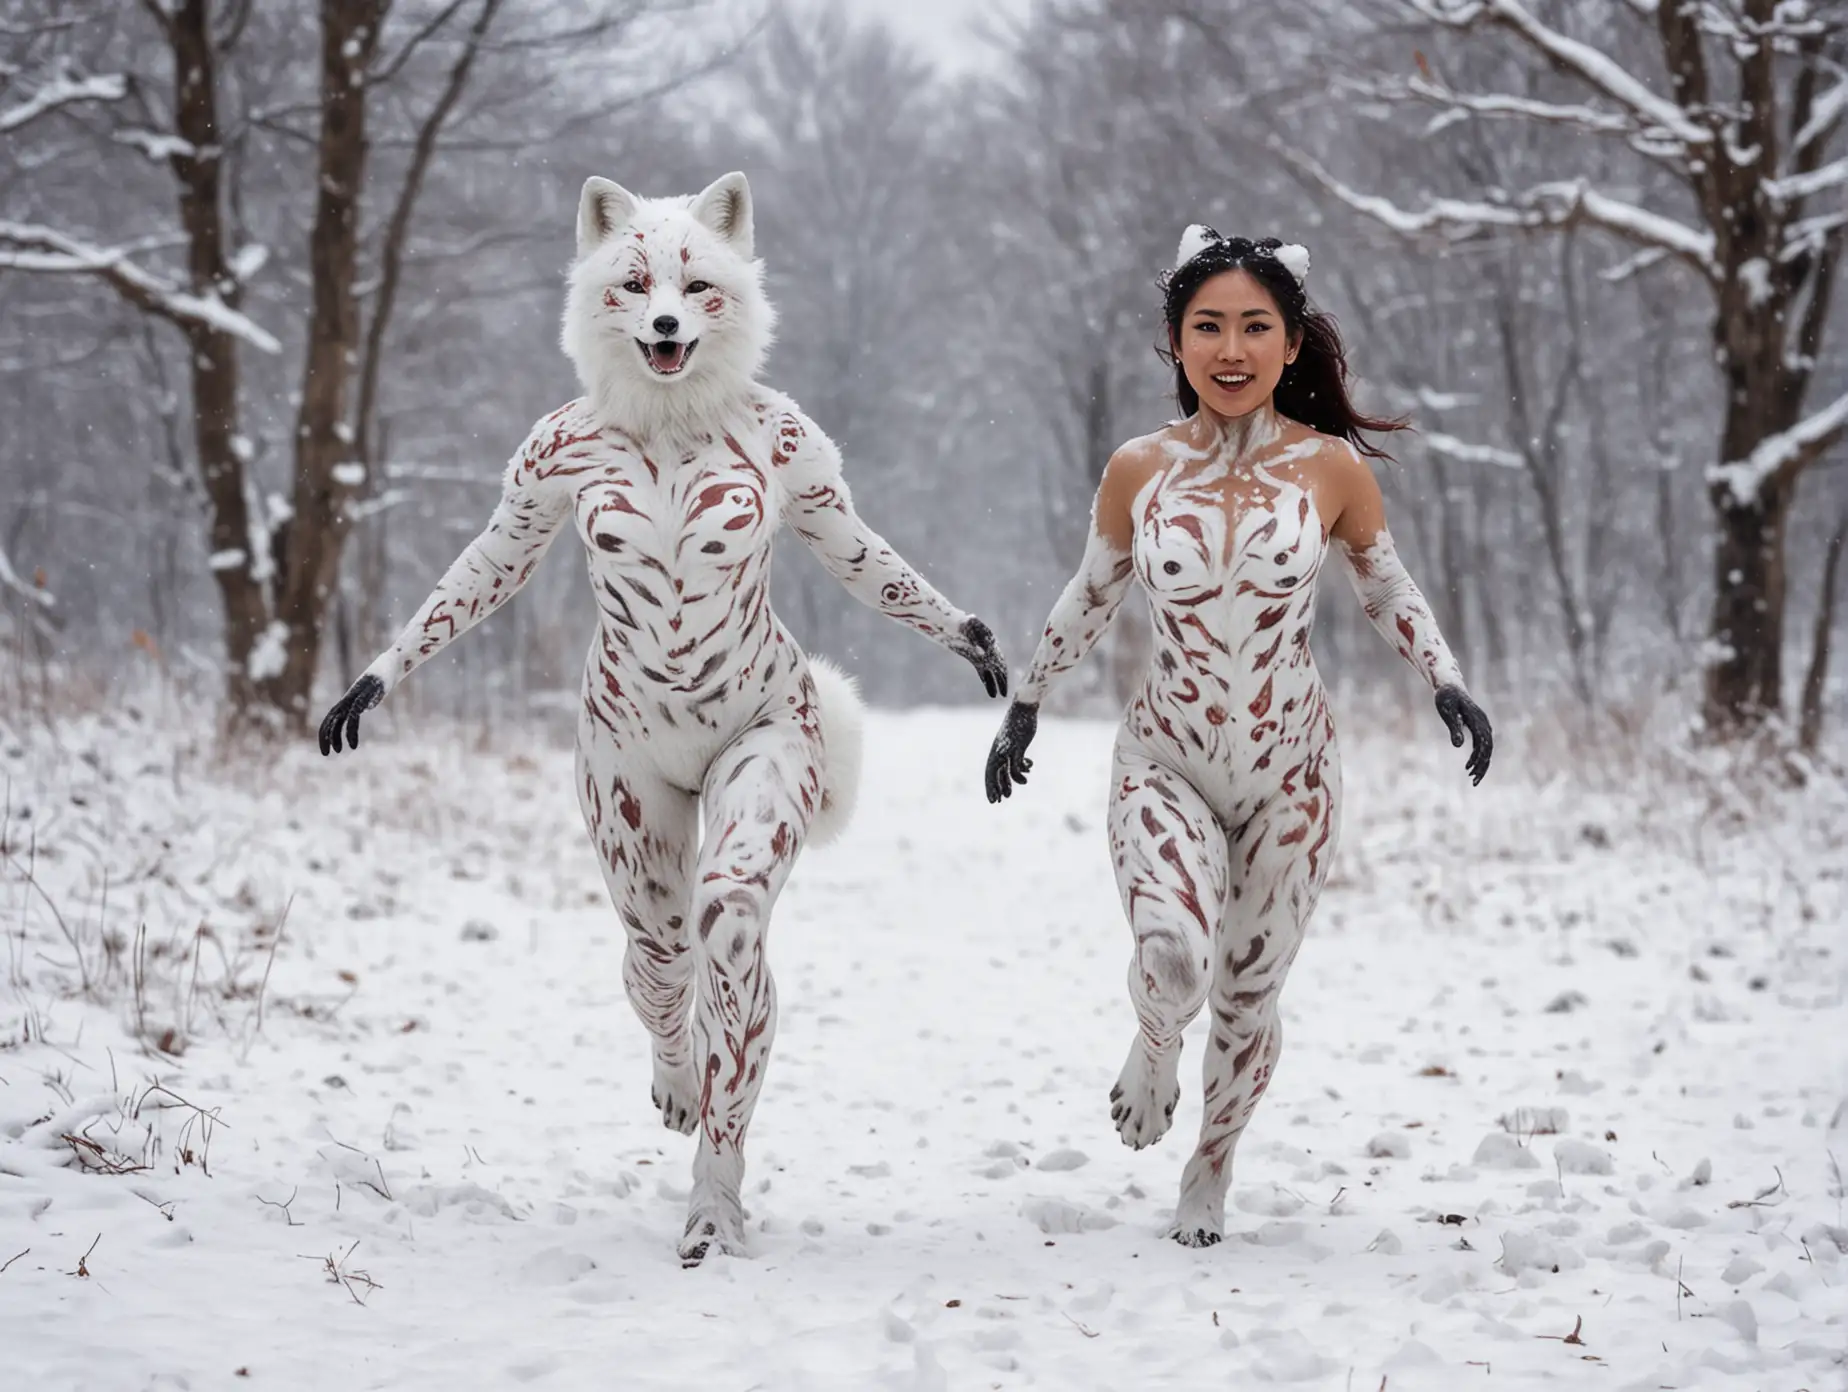 Full body. Asian woman. Body painted as an artic fox. Running in the snow